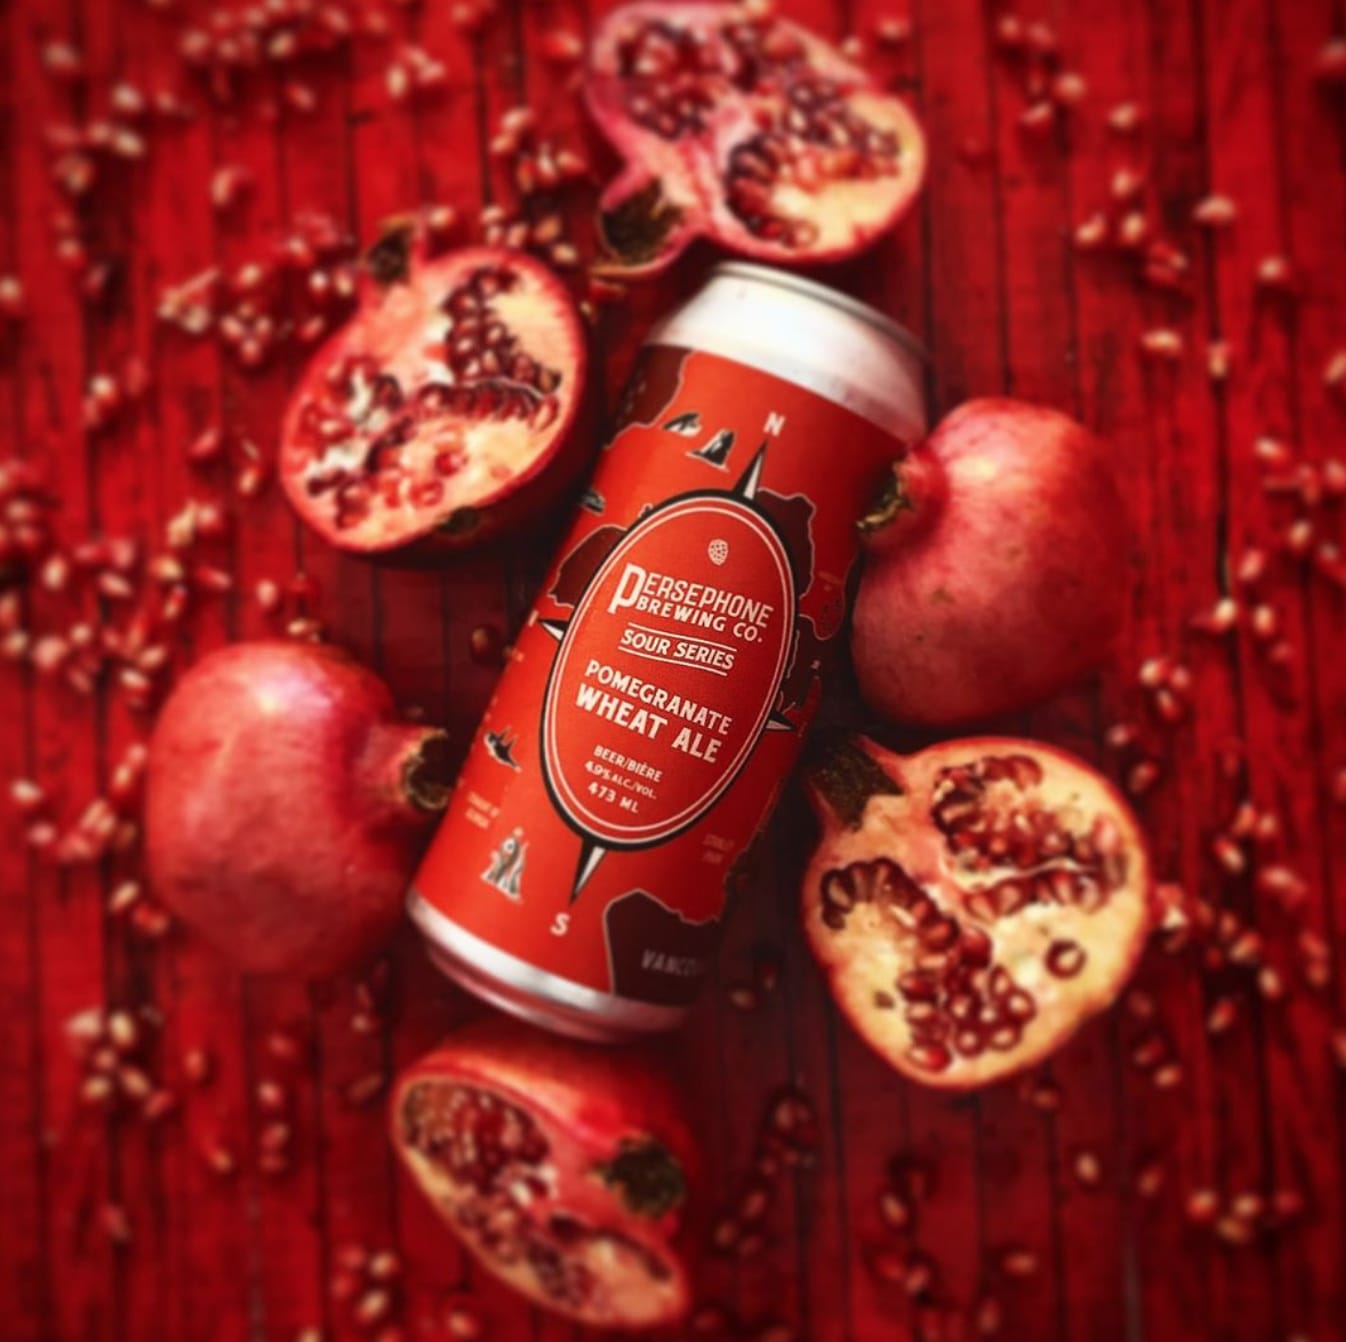 Pomegranate Wheat Ale by Persephone Brewing